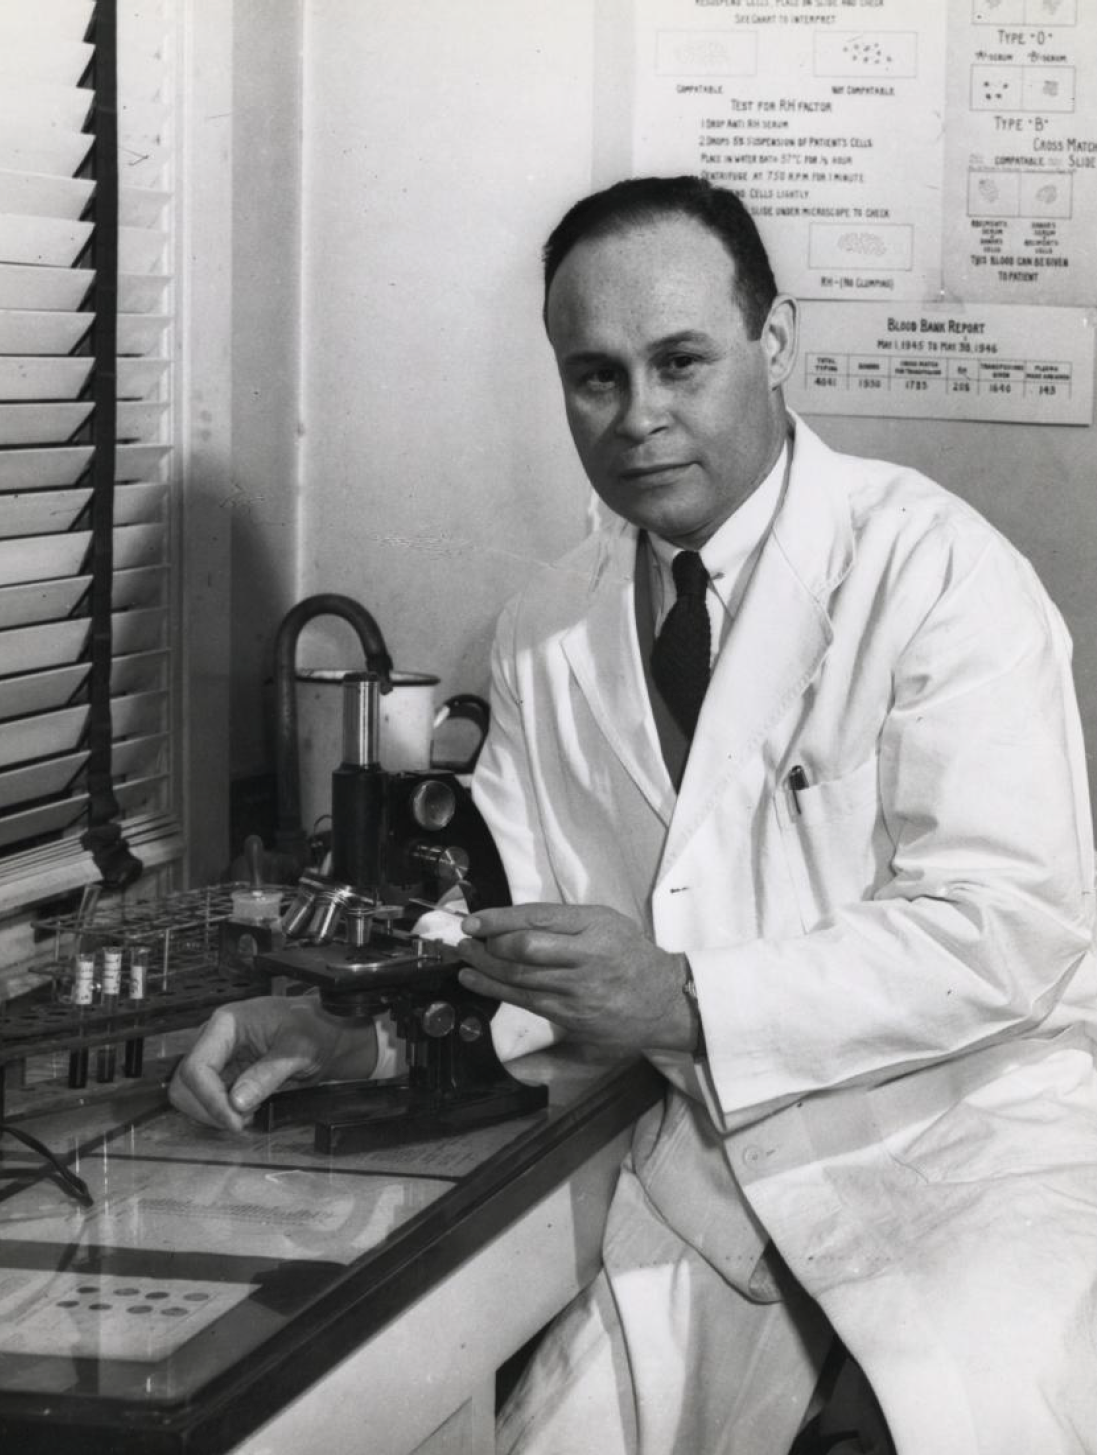 Portrait of Charles Drew in a laboratory wearing a lab coat.